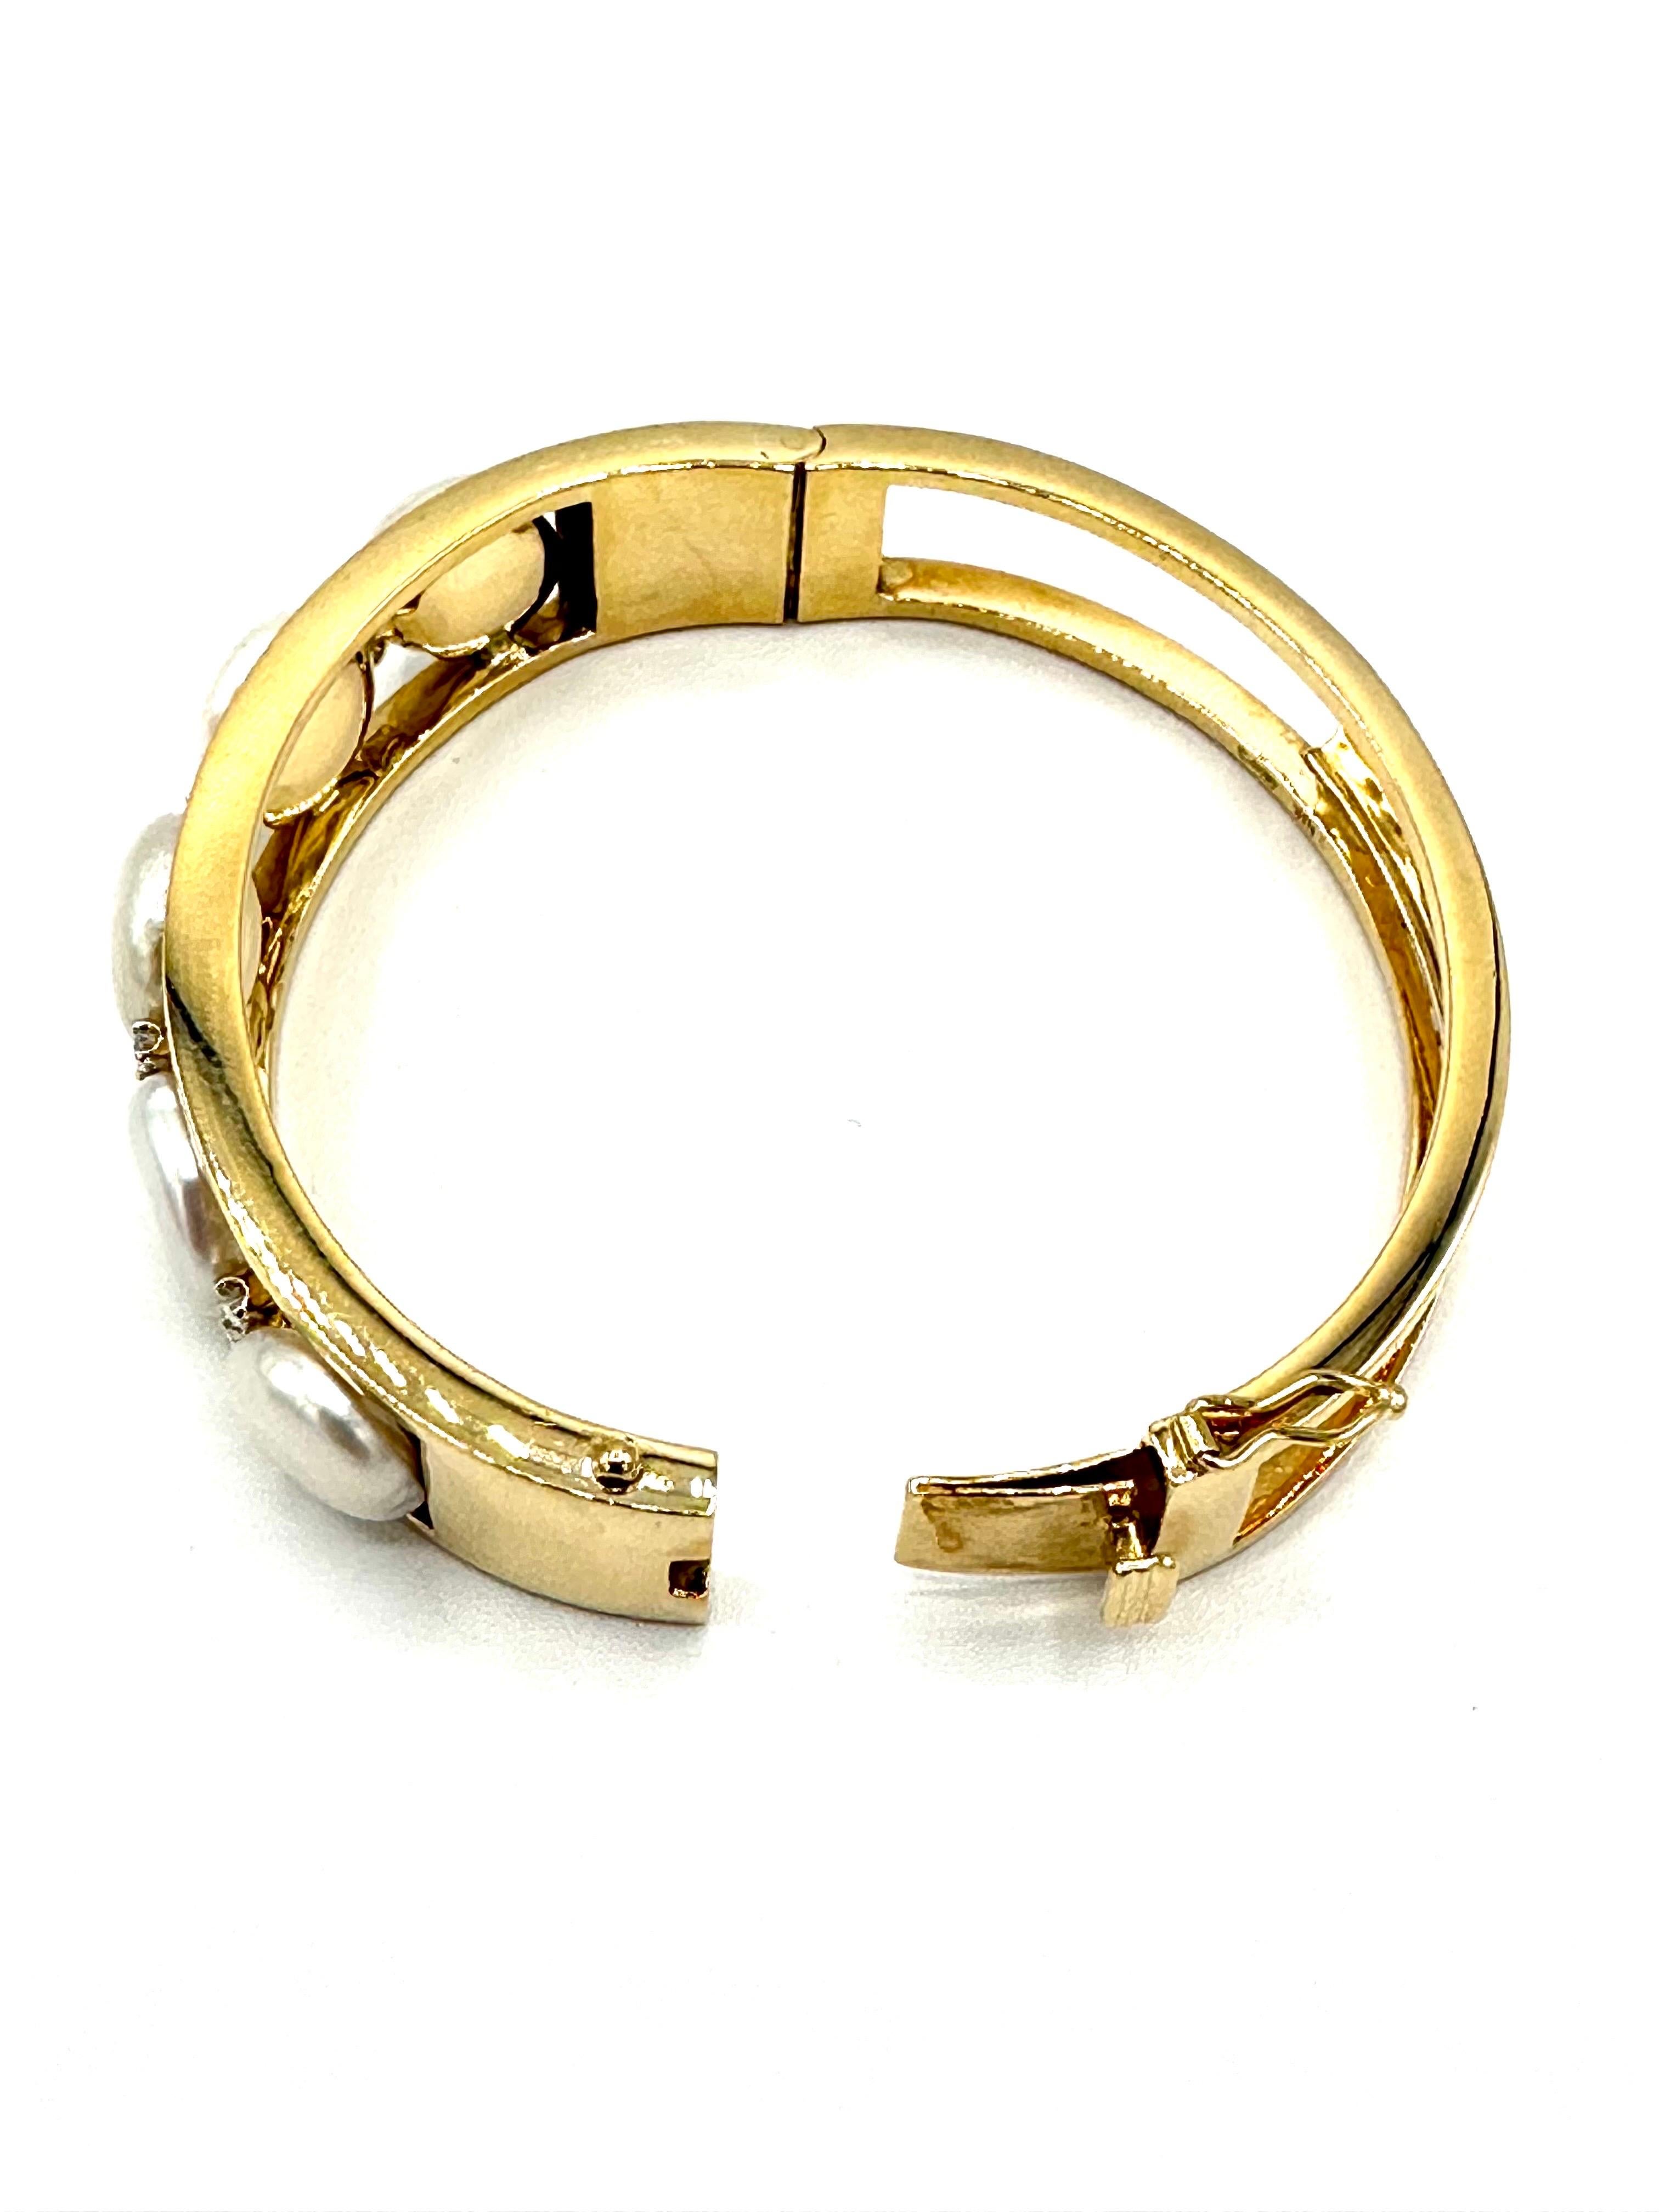 Women's or Men's Gumps Round Brilliant Diamond and Coin Pearl 18k Yellow Gold Bangle Bracelet